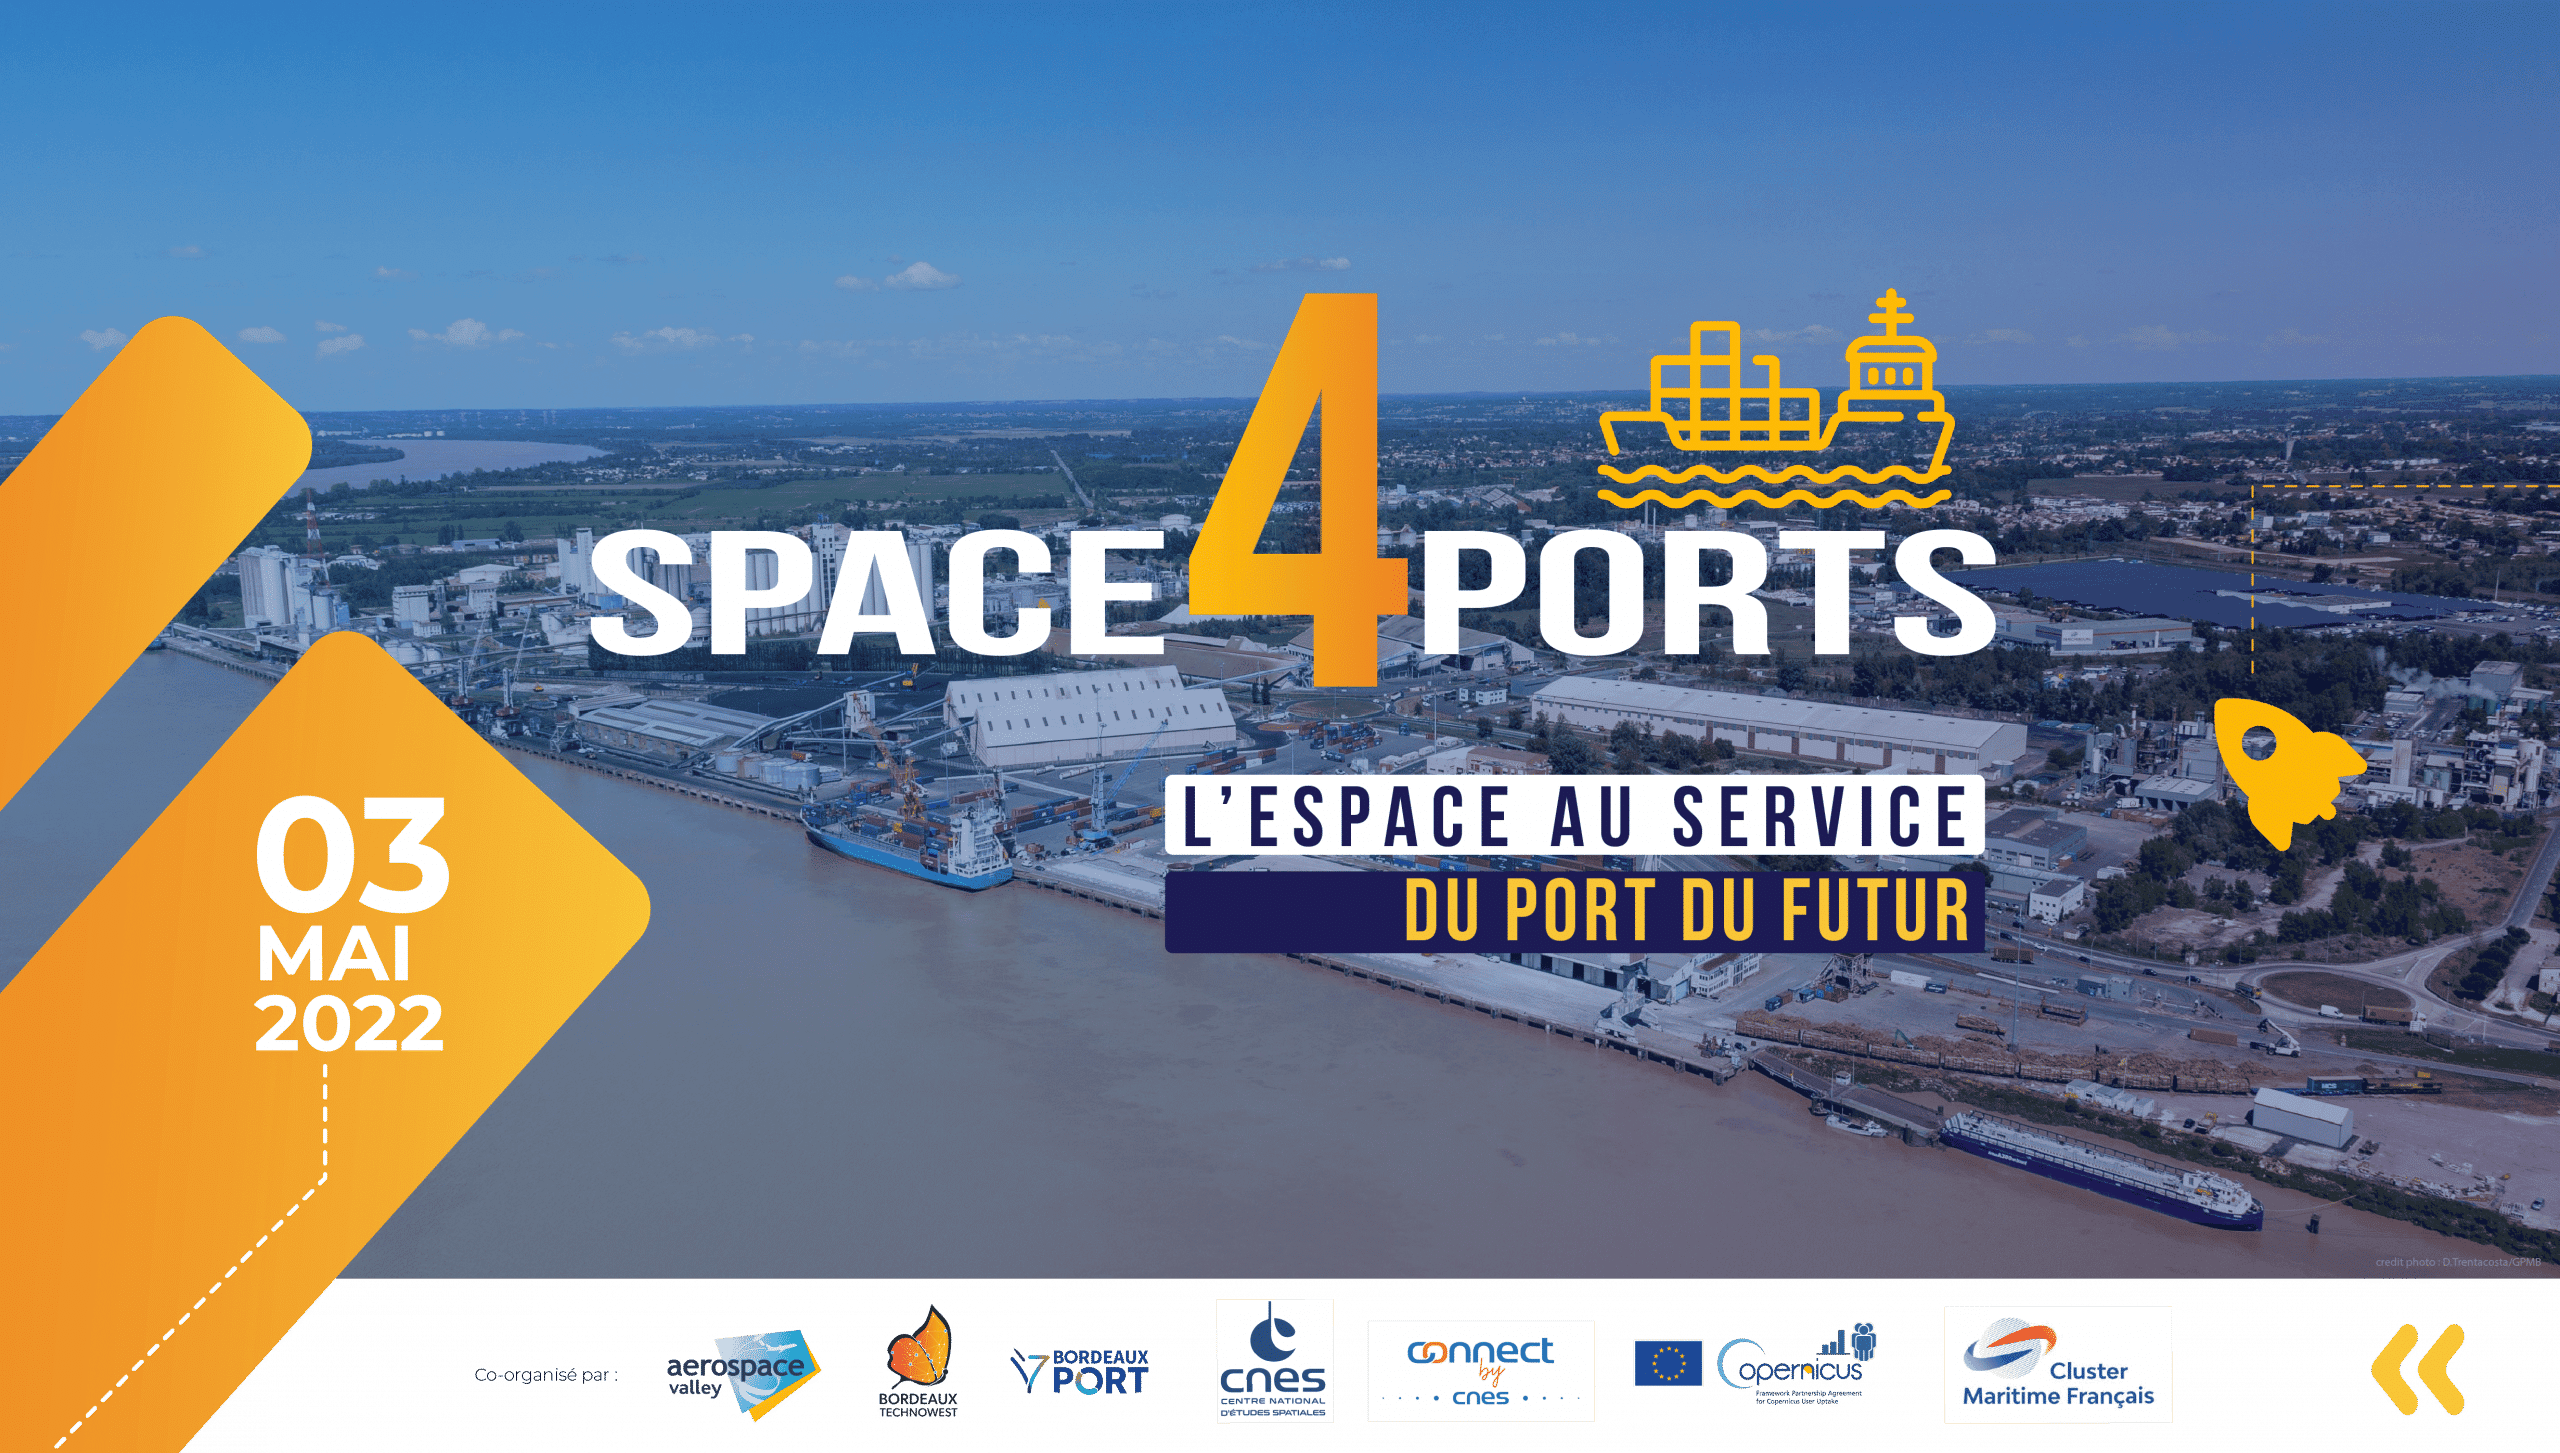 SPACE4PORTS